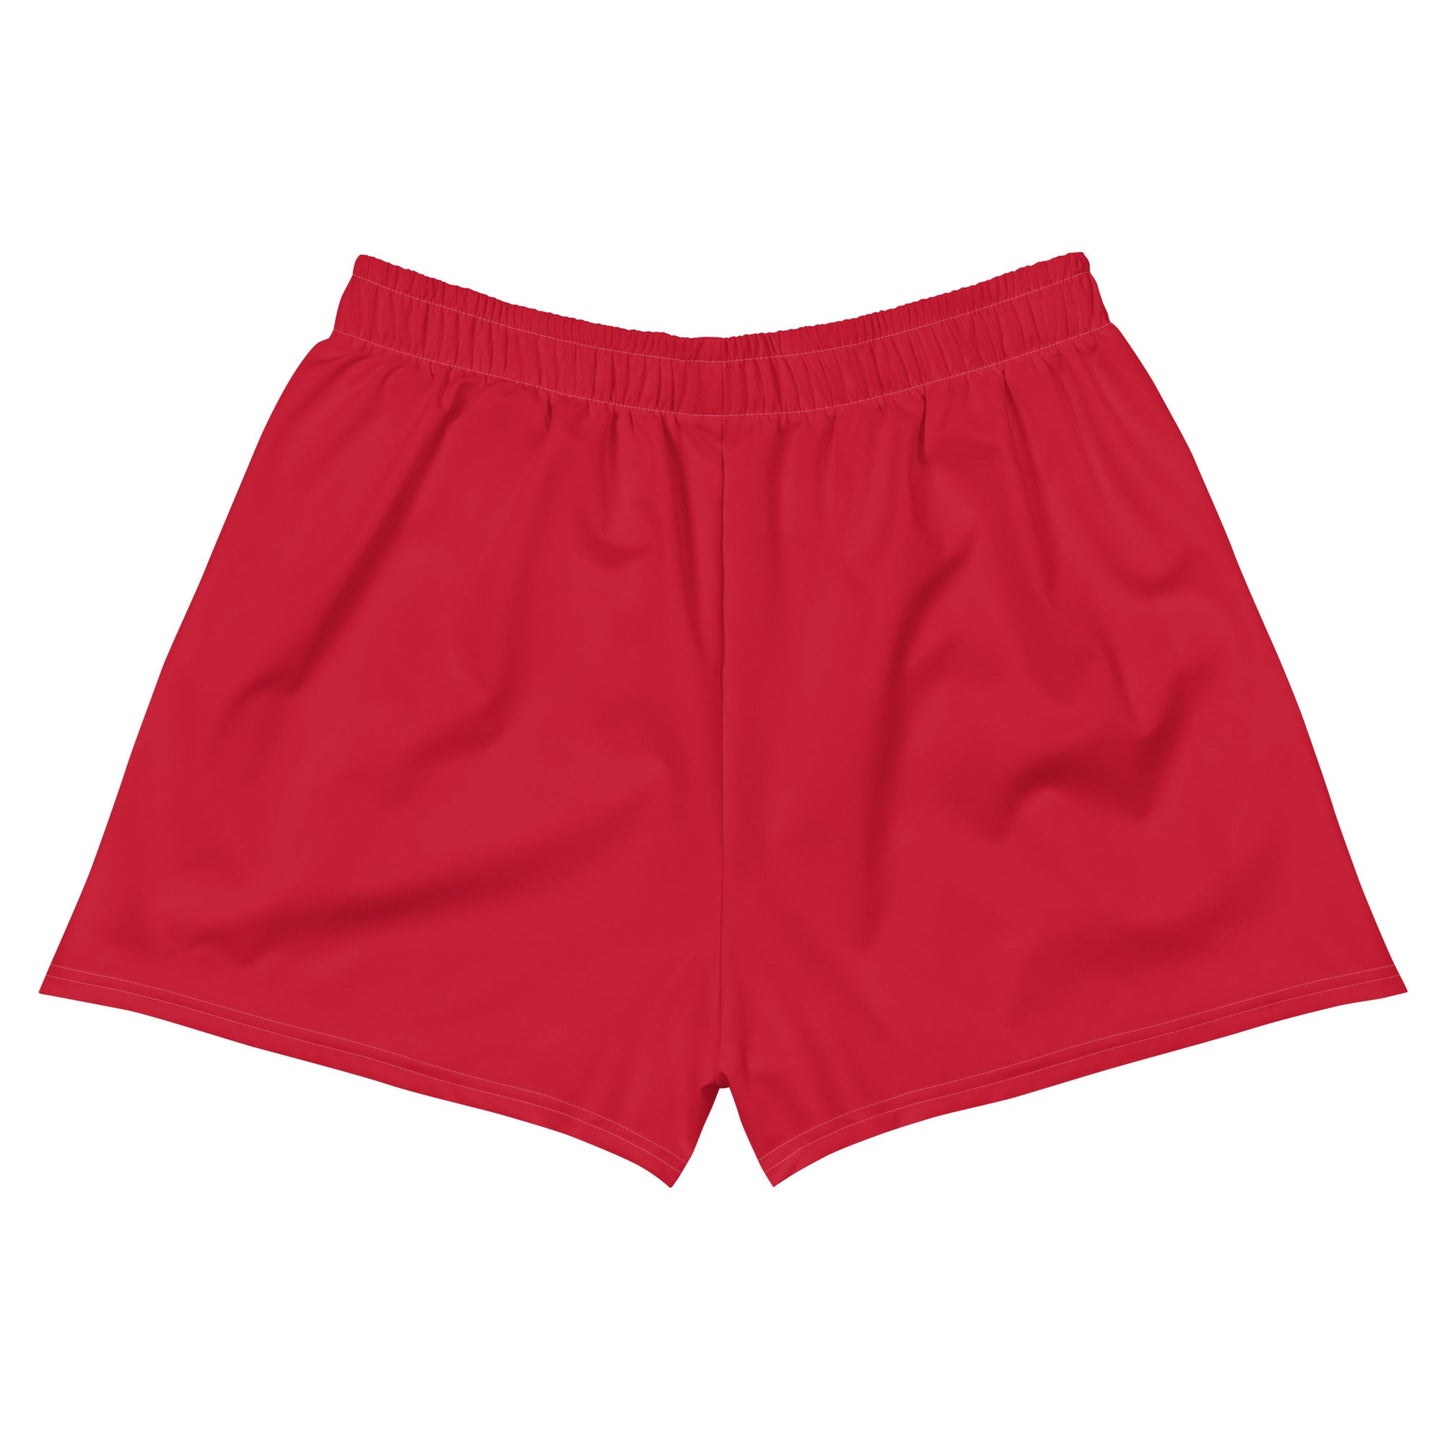 Kennedy for President Flag Women’s Athletic Shorts - TEAM KENNEDY. All rights reserved